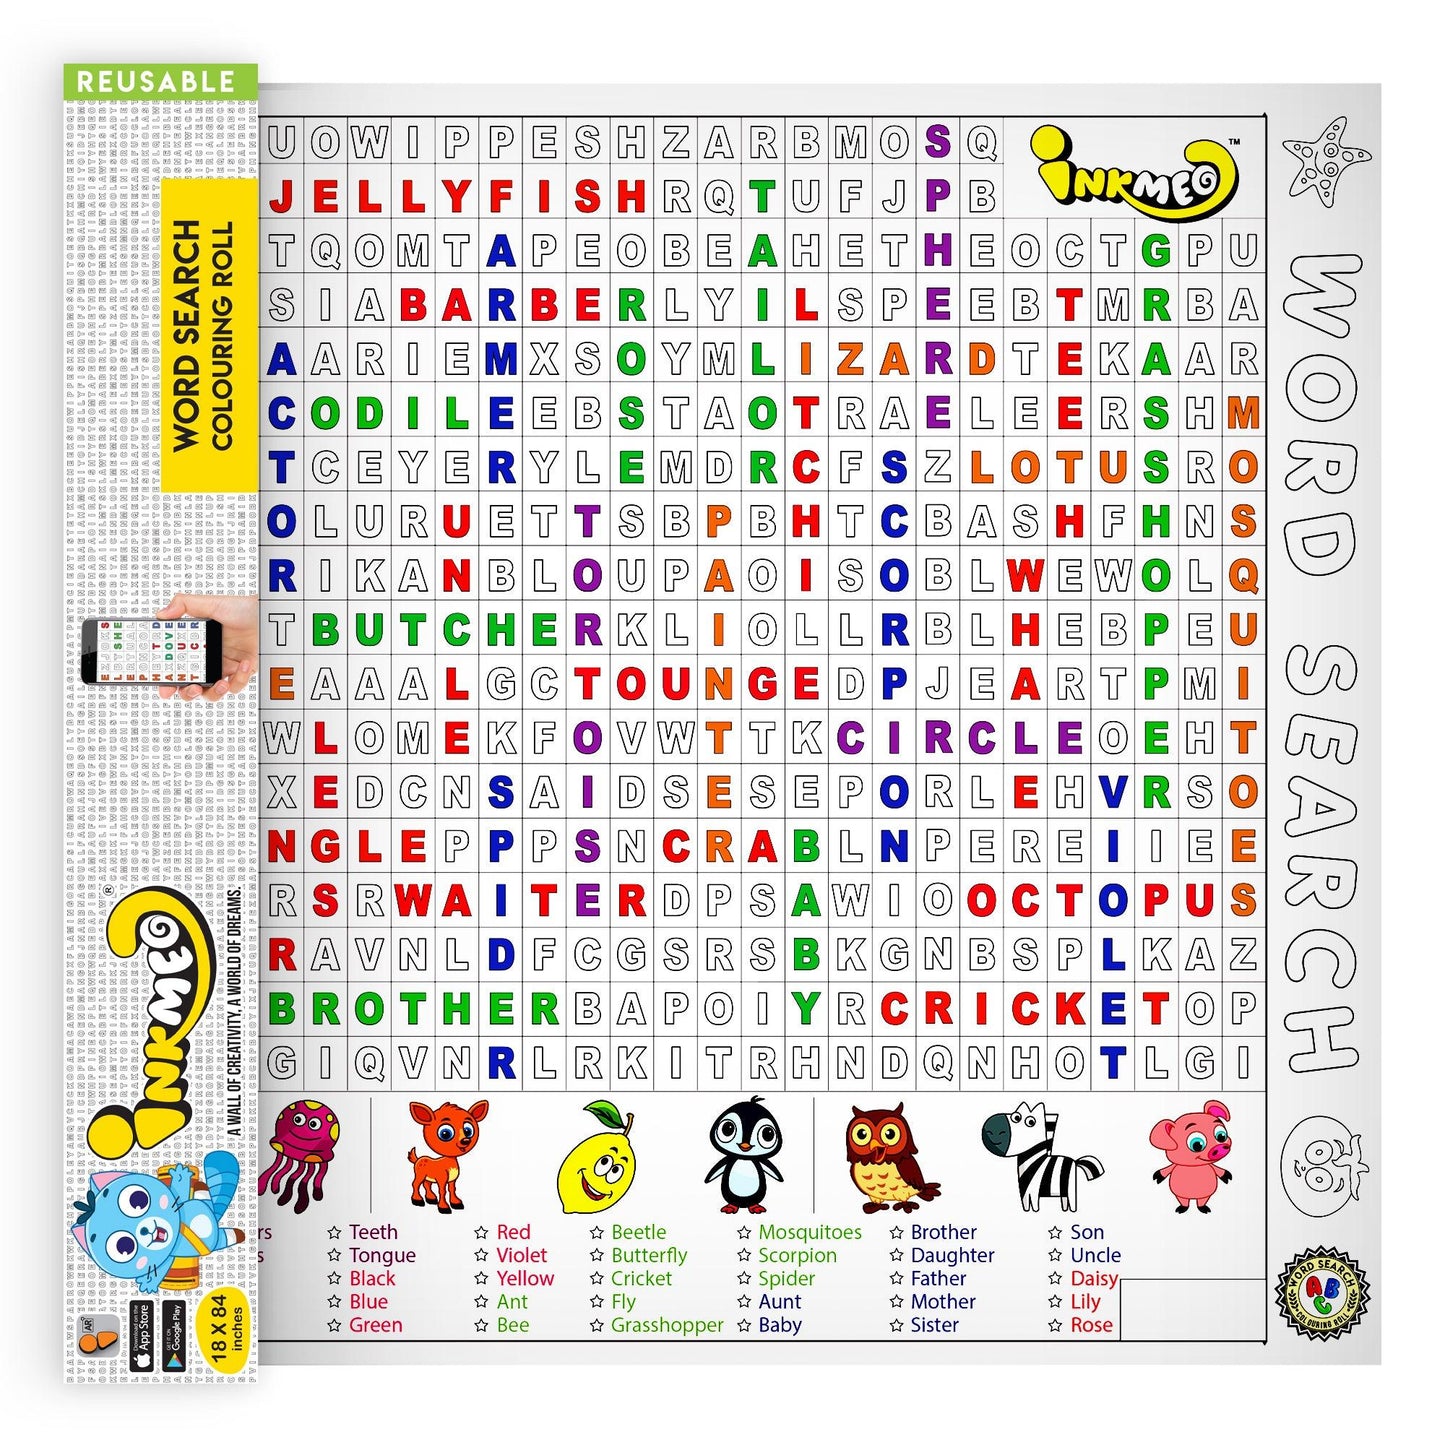 The image depicts a yellow box with an open roll, displaying words arranged in rows like puzzles alongside a colorful picture.